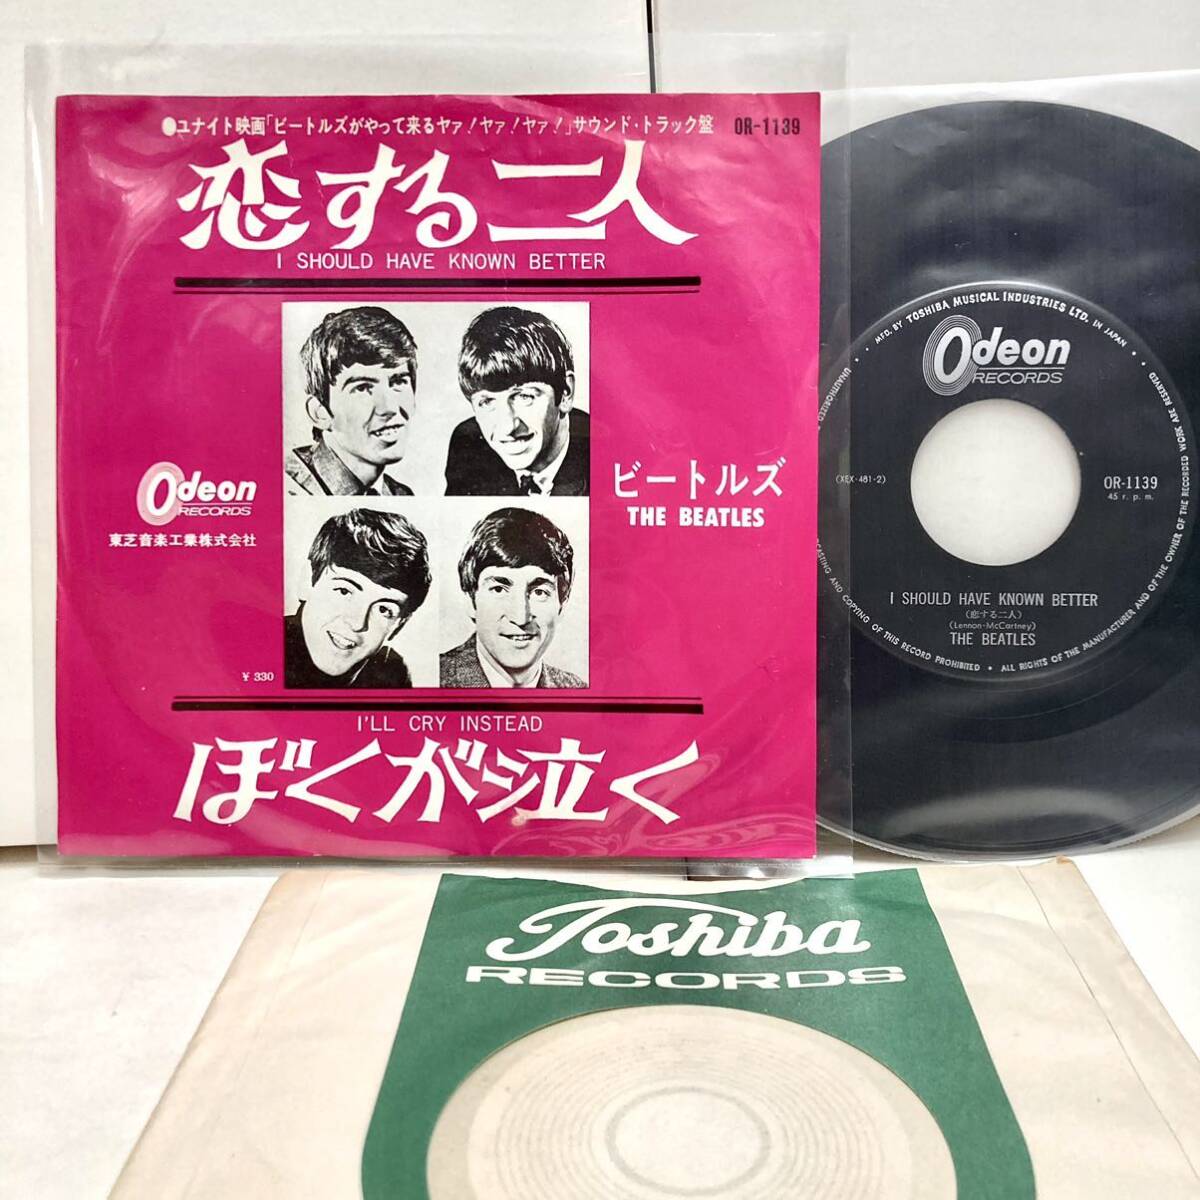 I Should Have Known Better 恋する二人 , I'll Cry Instead / The Beatles ビートルズ【EP アナログ レコード 】サウンドトラック盤 _画像1